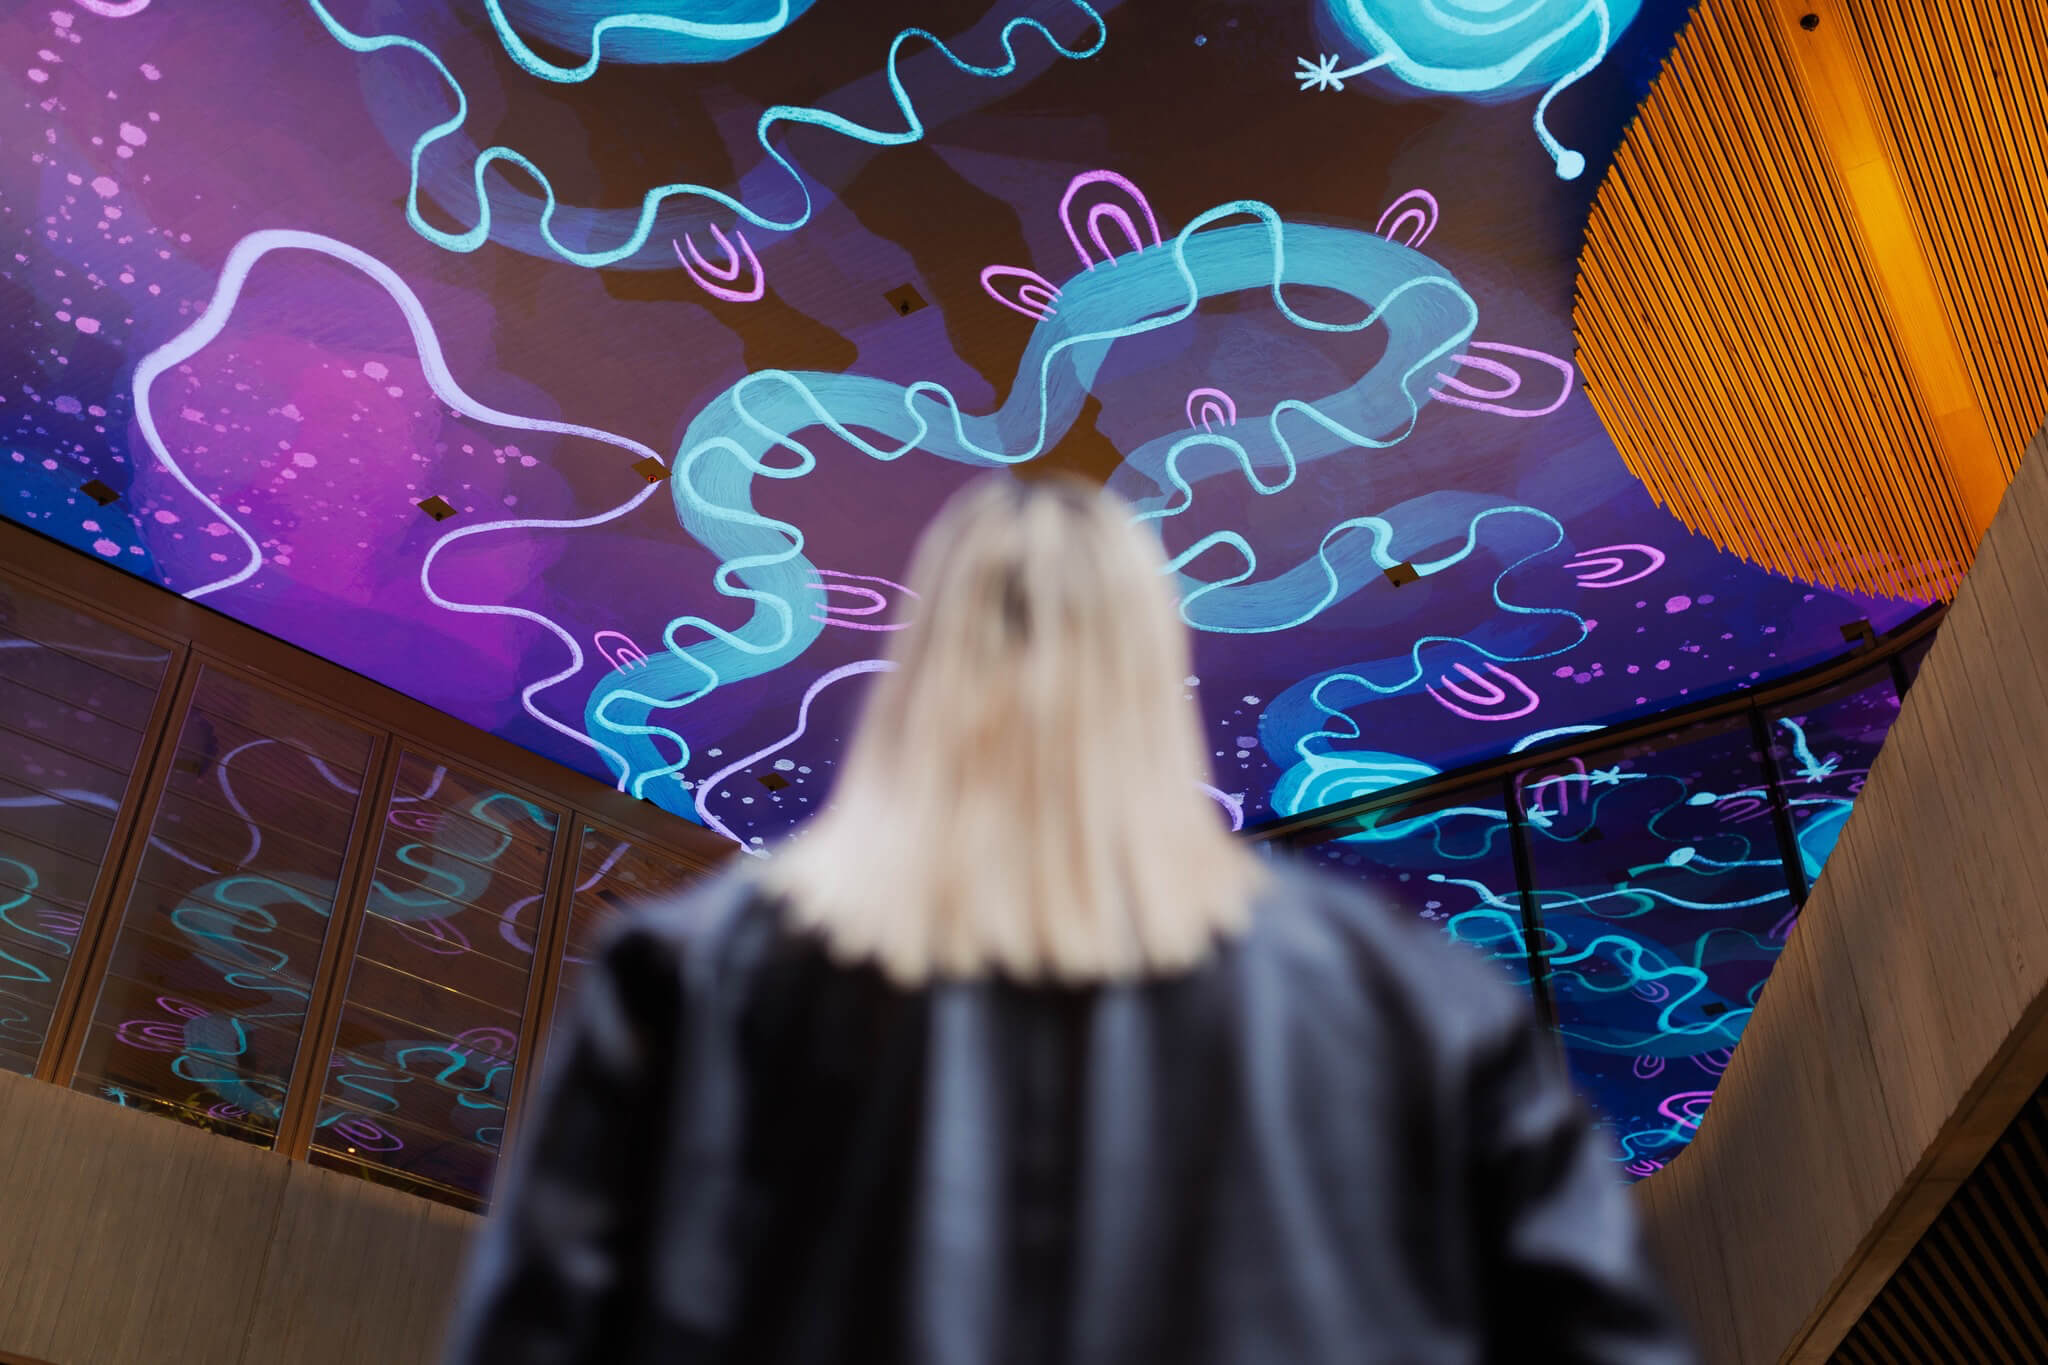 Photo of artist Rachael Sara Mirvac Heritage Lanes commercial lobby foyer in Brisbane Australia showing digital placemaking art screen with vibrant blue indigenous Australian aboriginal artwork created by artist Rachael Sarra in partnership with VANDAL.